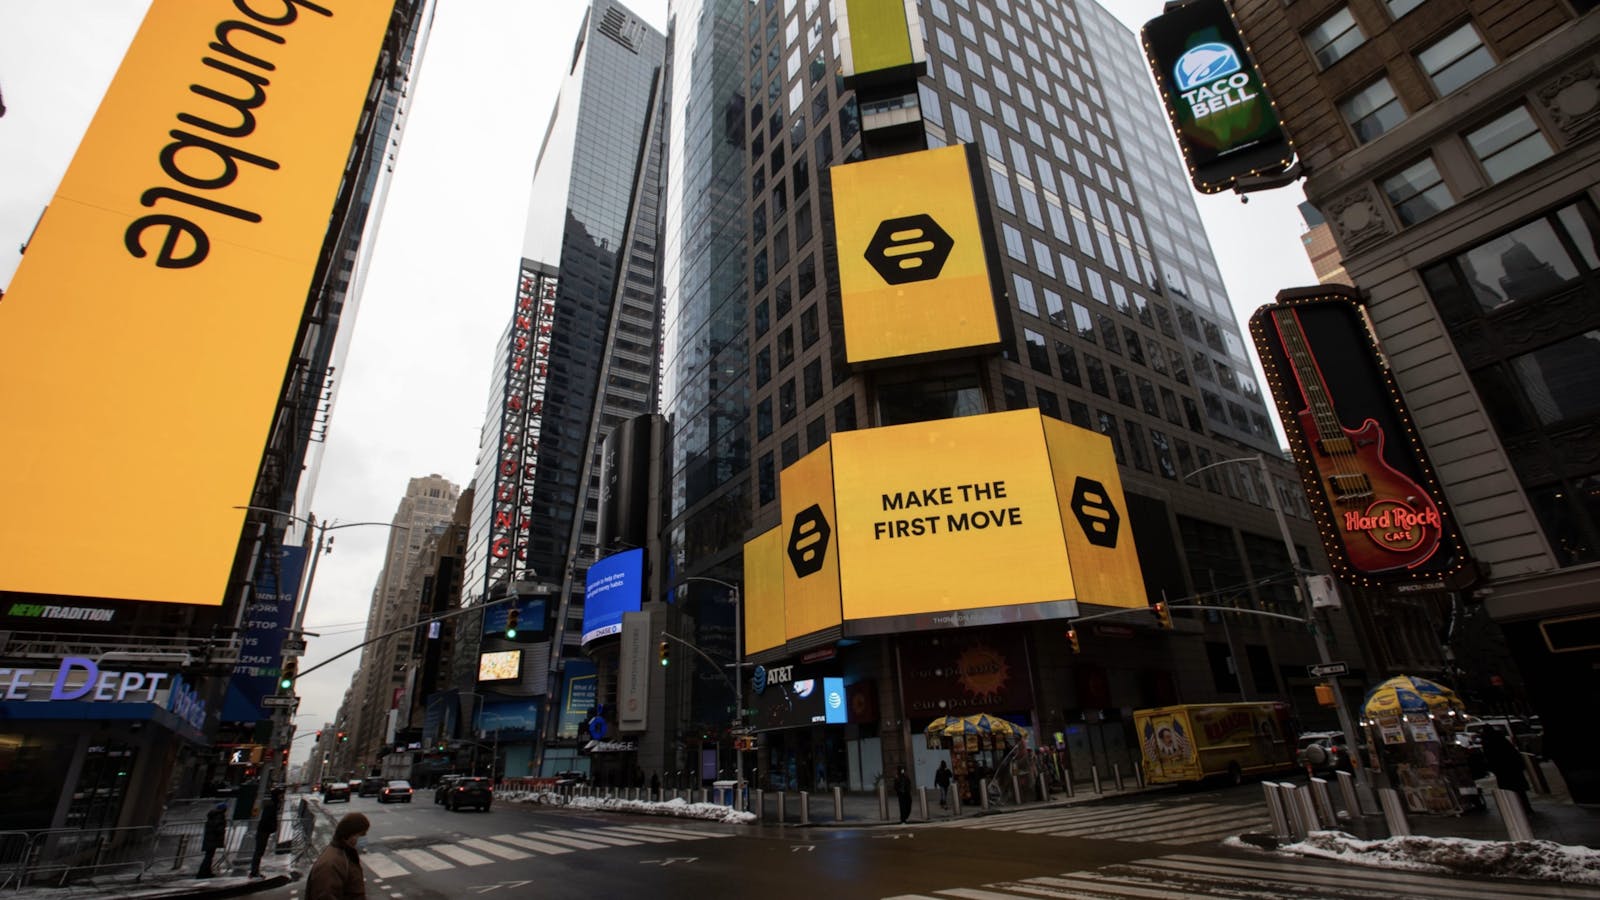 Signage for Bumble on the day the company went public on the Nasdaq earlier this year. Photo by Bloomberg.